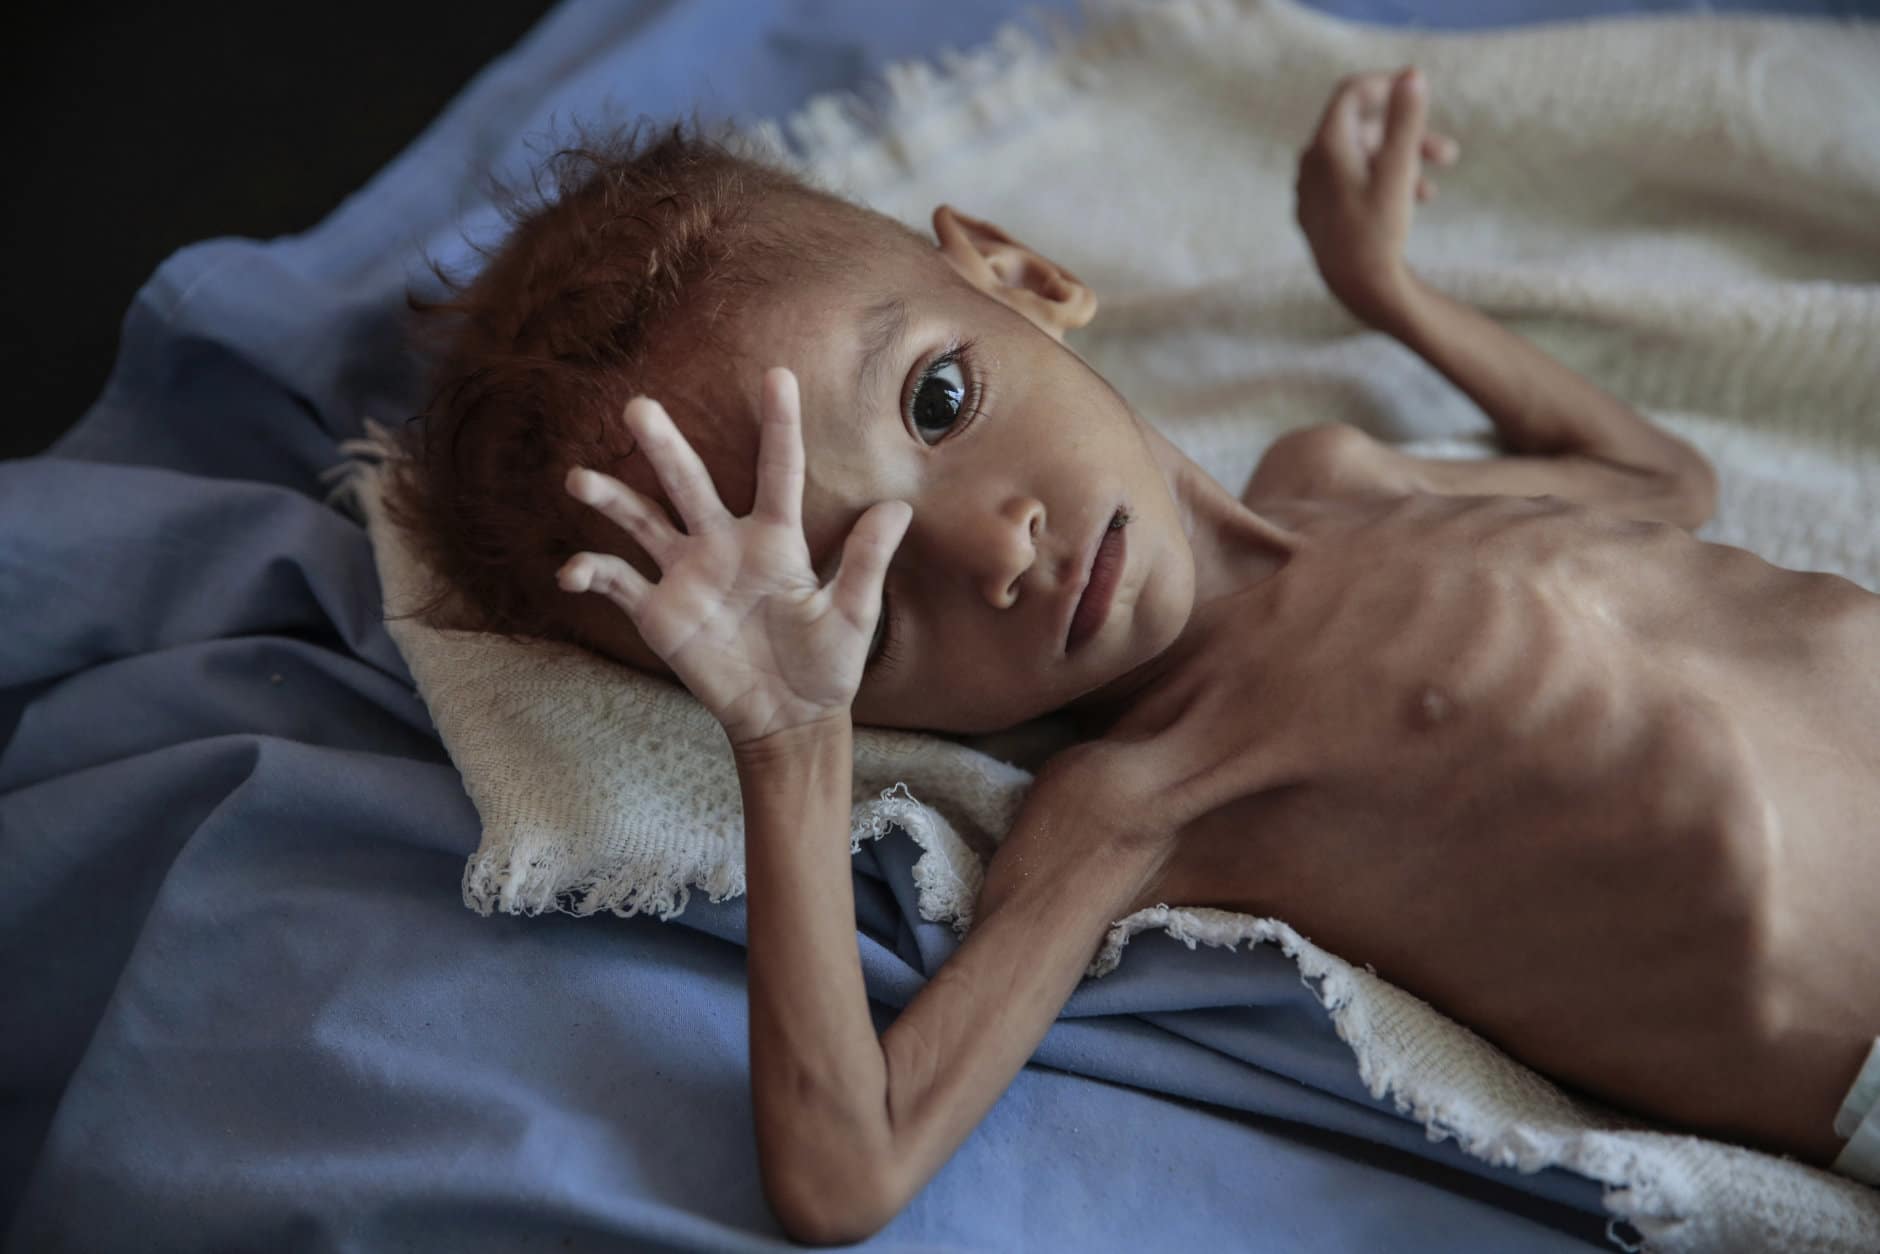 A severely malnourished boy rests on a hospital bed at the Aslam Health Center, in Hajjah, Yemen, on Oct. 1, 2018. Malnutrition, cholera, and other epidemic diseases have ravaged through displaced and impoverished communities in Yemen, threatening to worsen the world's largest humanitarian crisis. (AP Photo/Hani Mohammed)